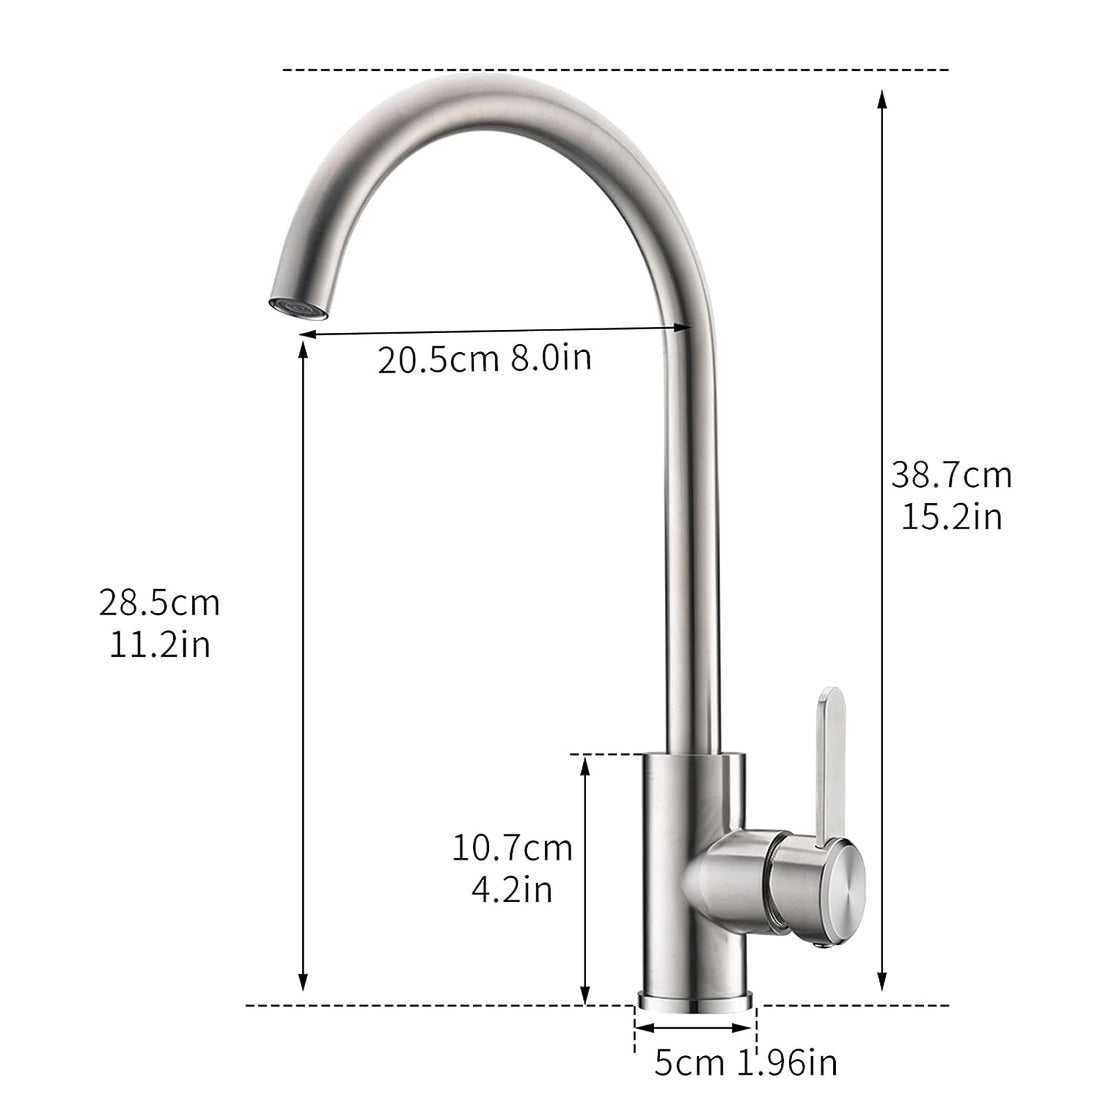 InArt 304 SS Single Lever Kitchen Sink Faucet Tap 360° Rotatable (Brushed Nickel) KSF028 - InArt-Studio